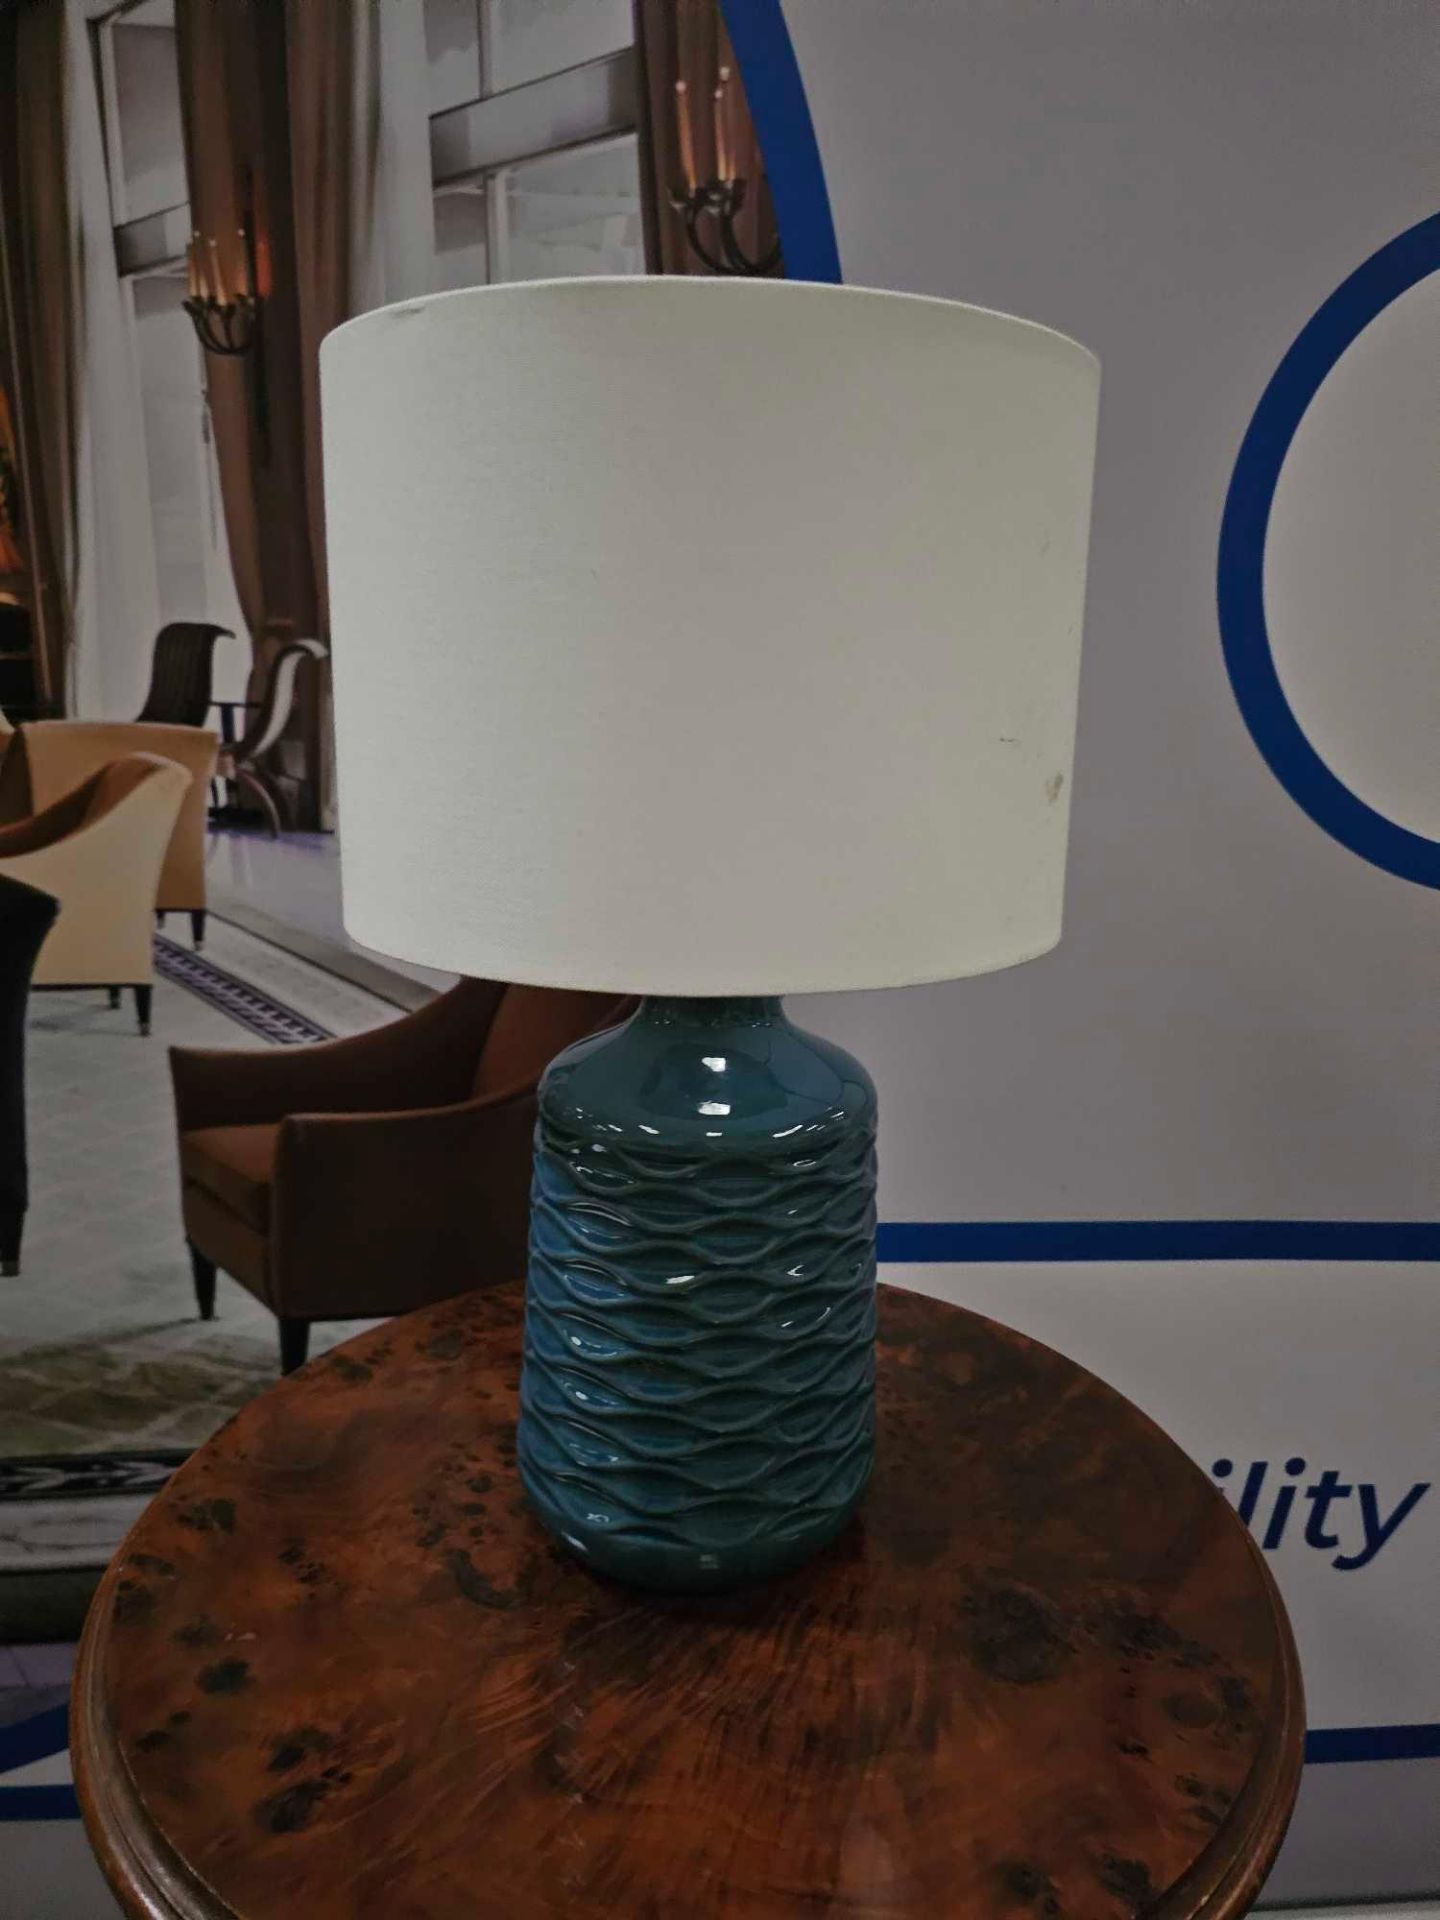 Annie Ceramic Table Lamp Blue With A Ceramic Base And Fabric Lampshade, This Table Lamp Offers A